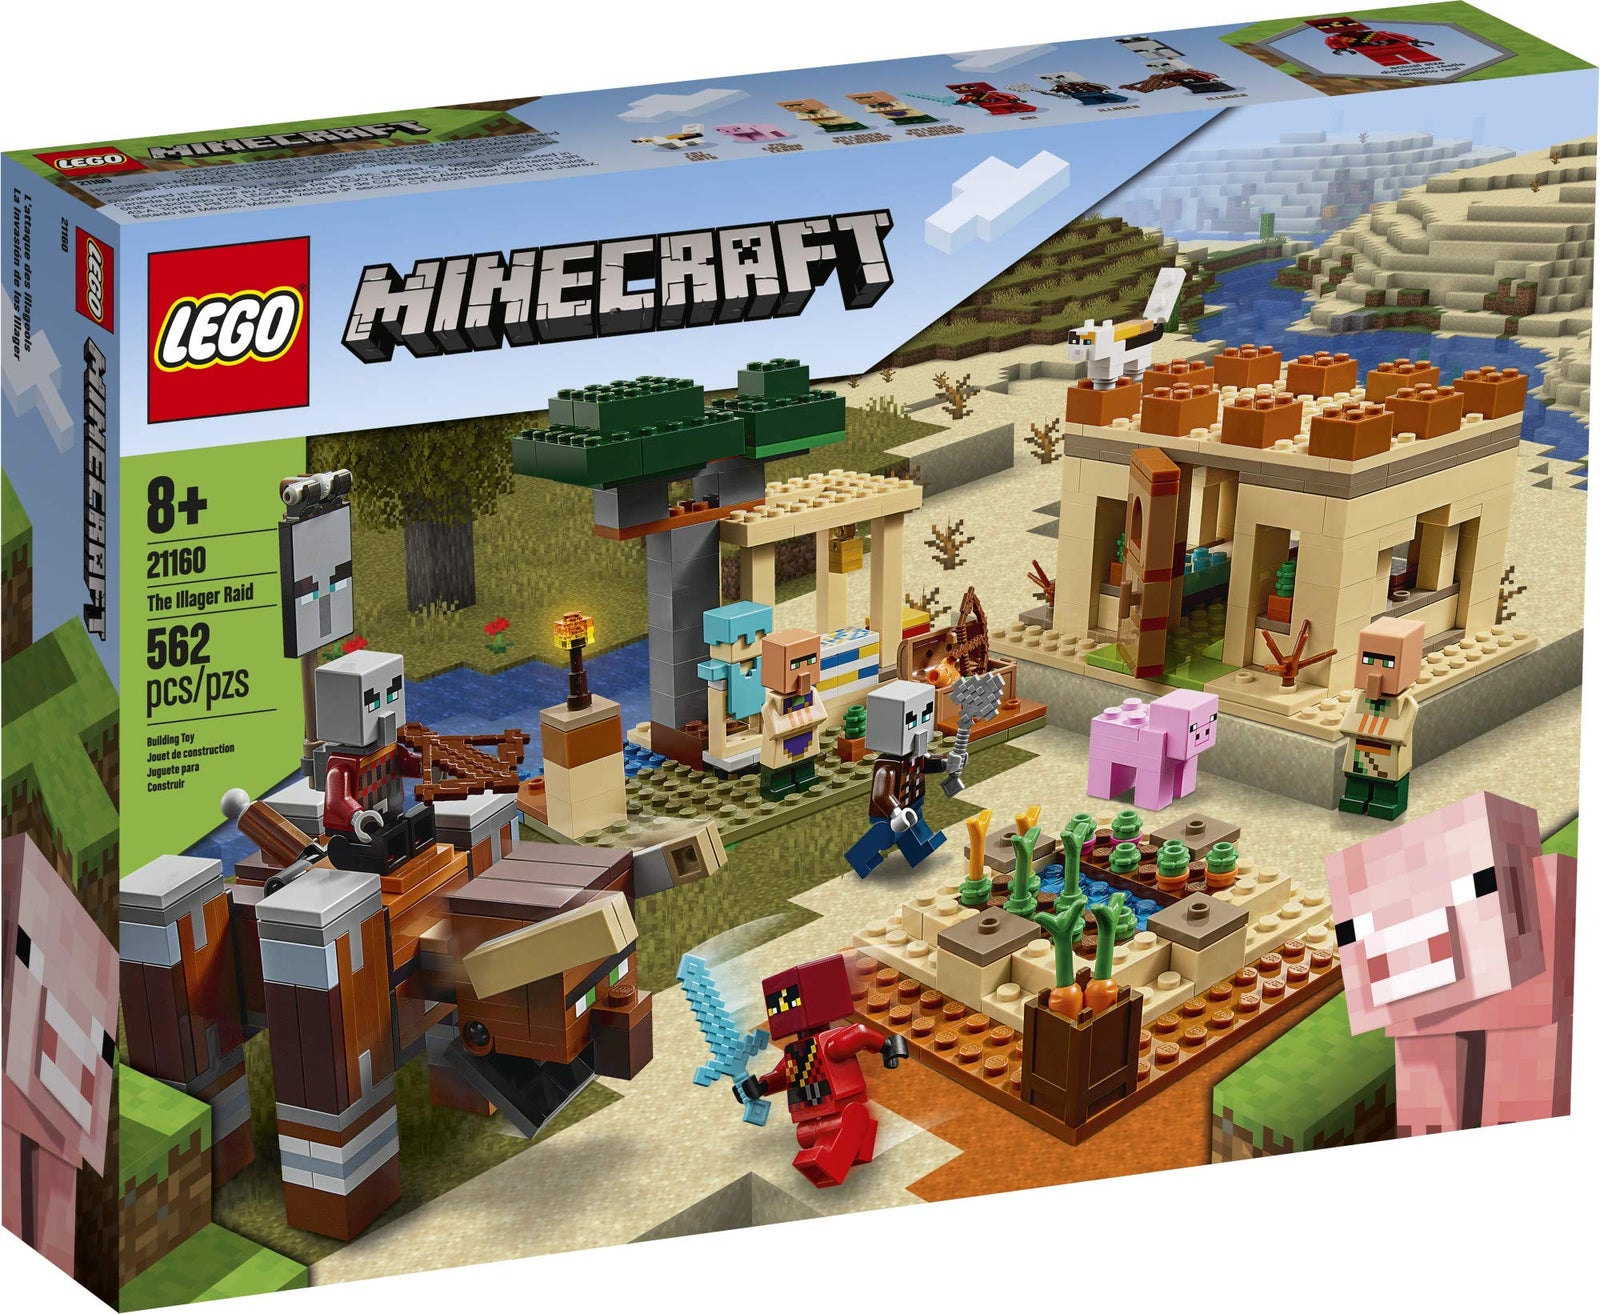 LEGO Minecraft The Illager Raid 21160 Building Toy Action Playset for Boys and Girls Who Love Minecraft, New 2020 (562 Pieces)